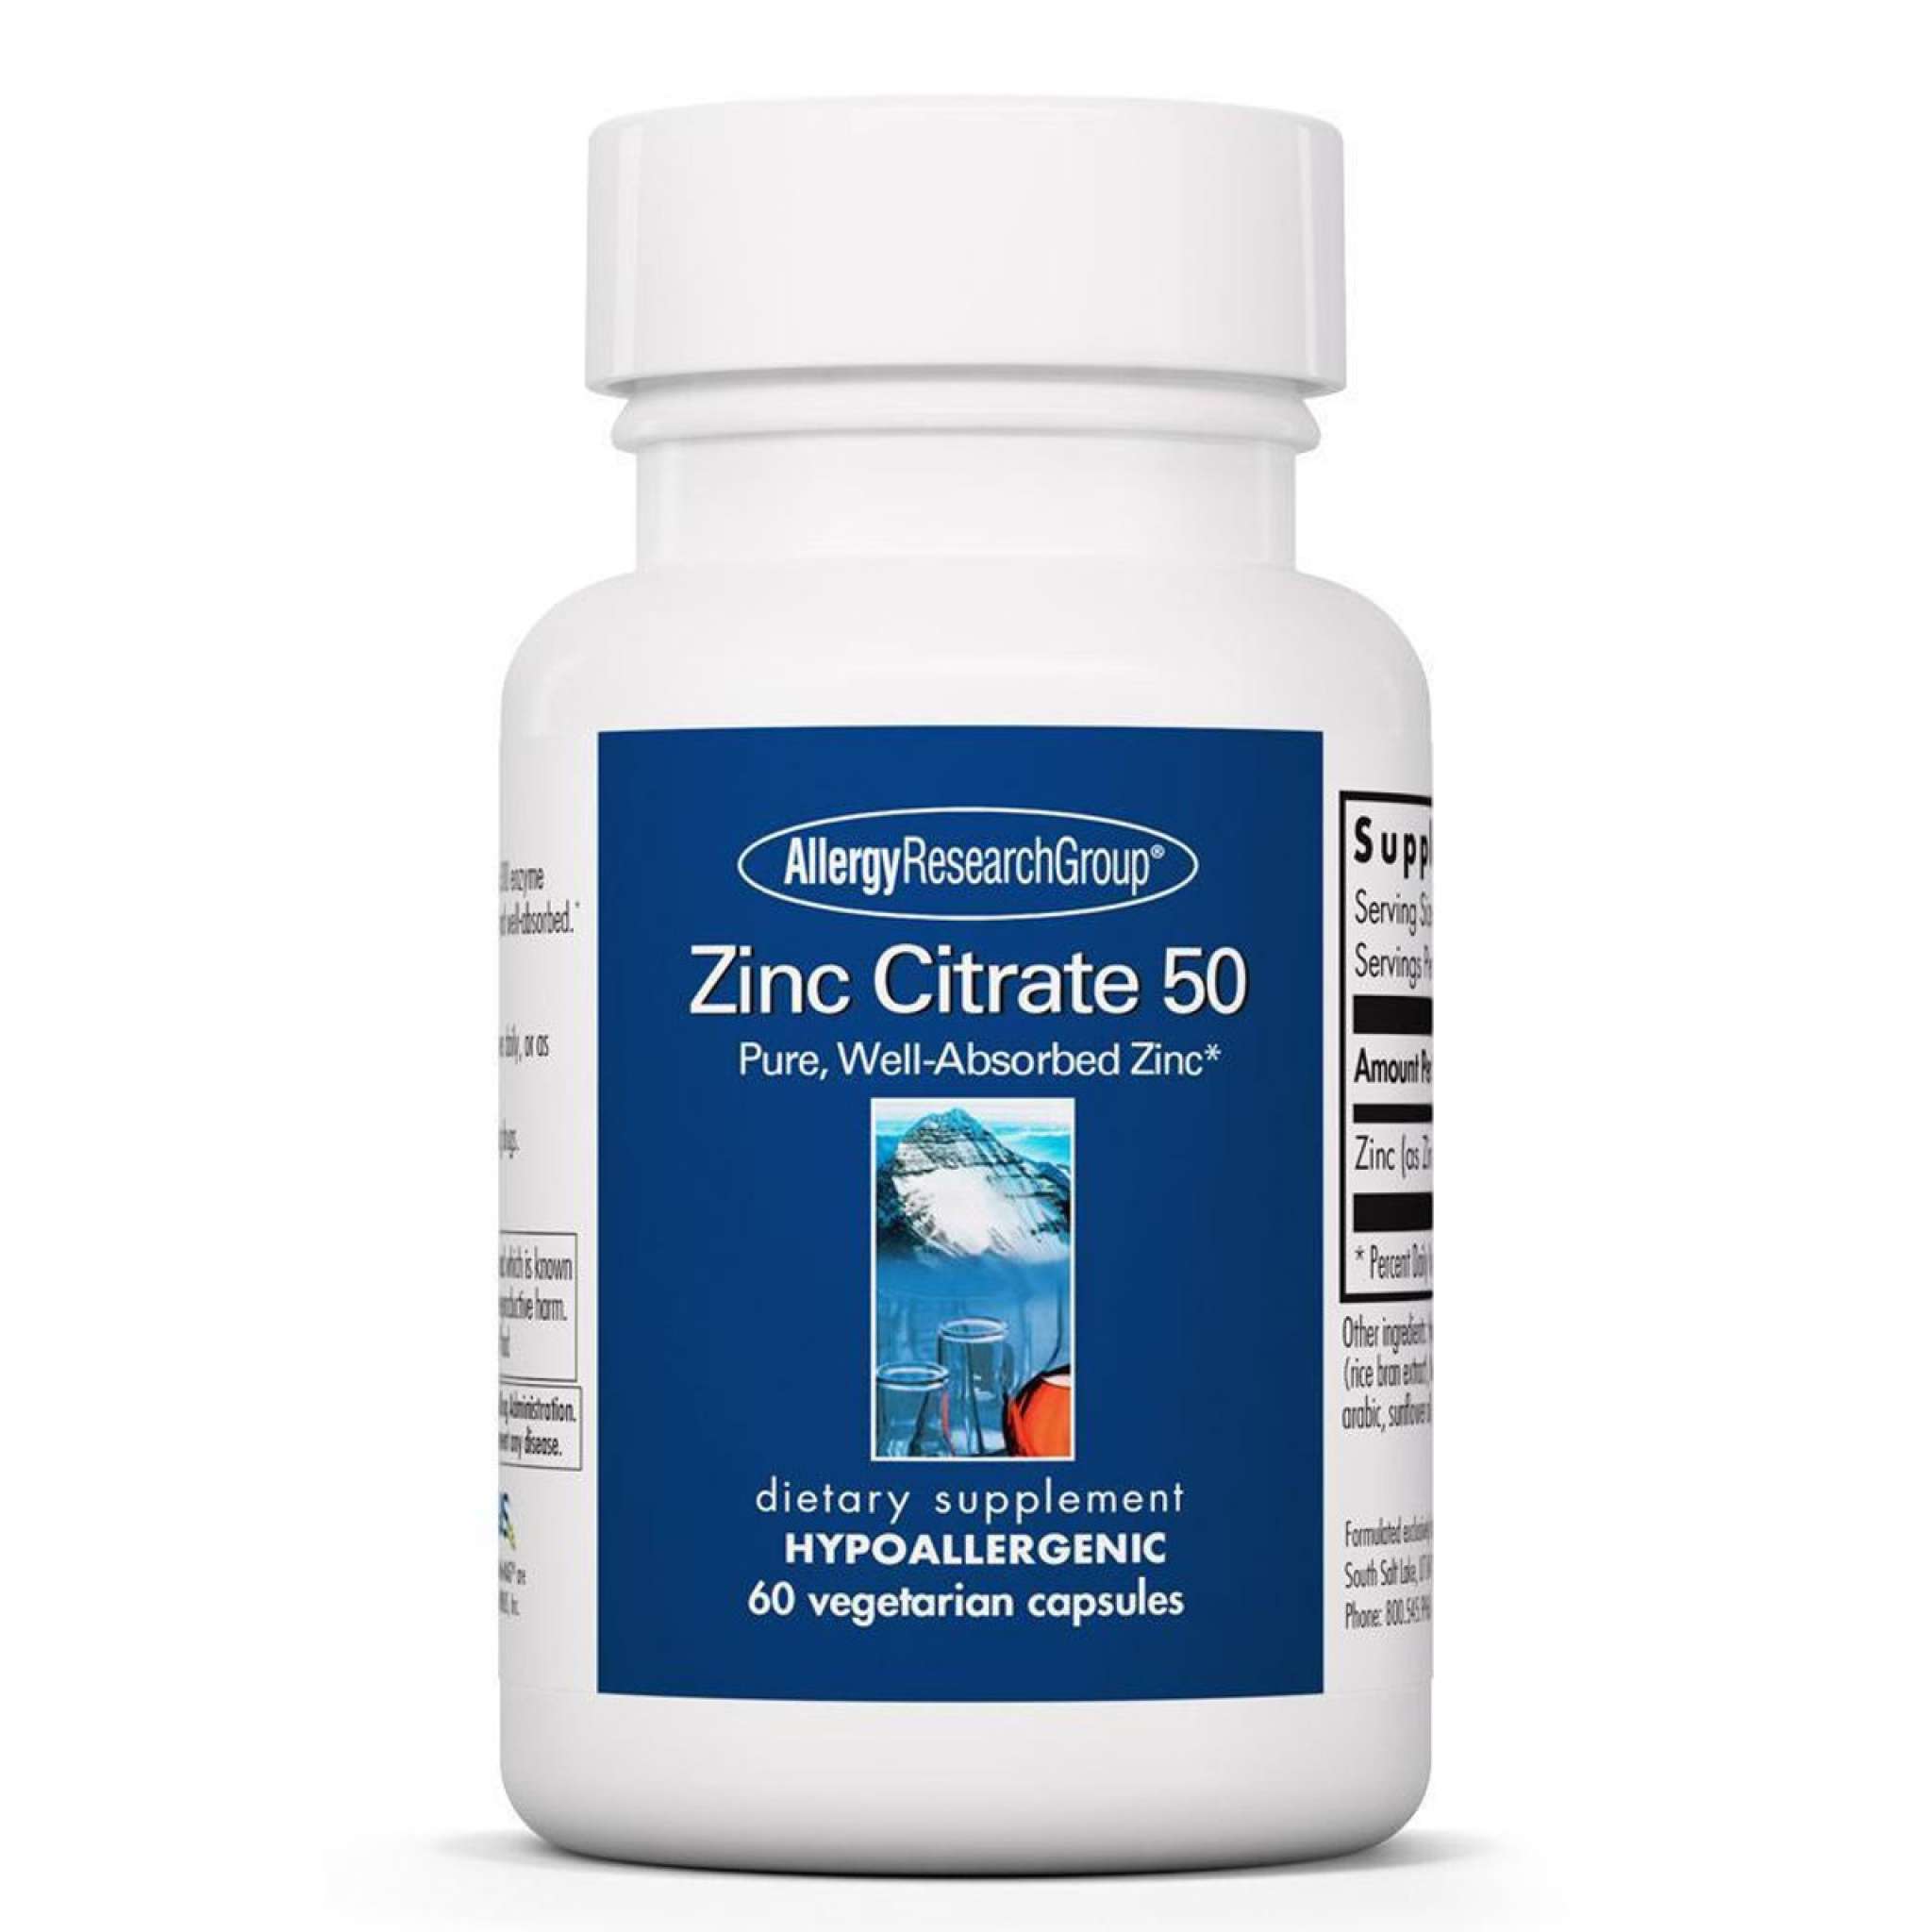 Allergy Research Group - Zinc Citrate 50